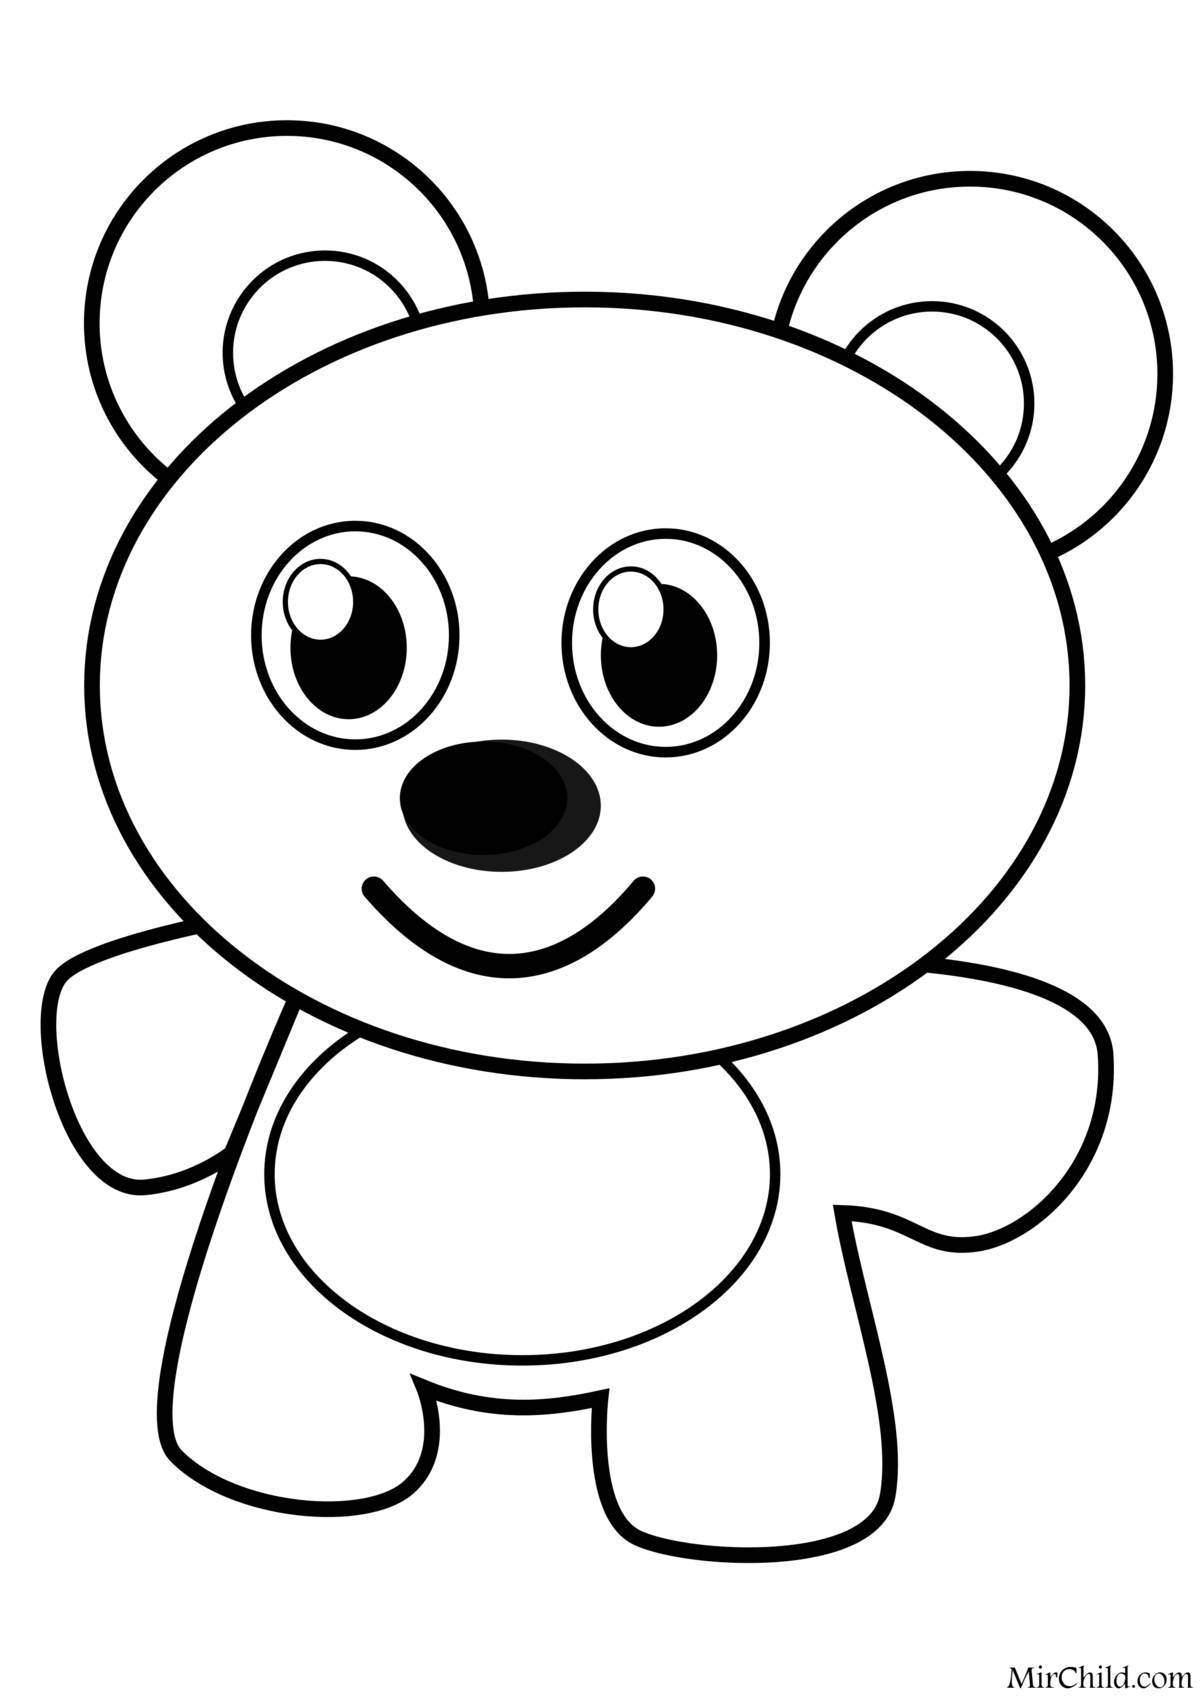 Amazing simple coloring book for kids